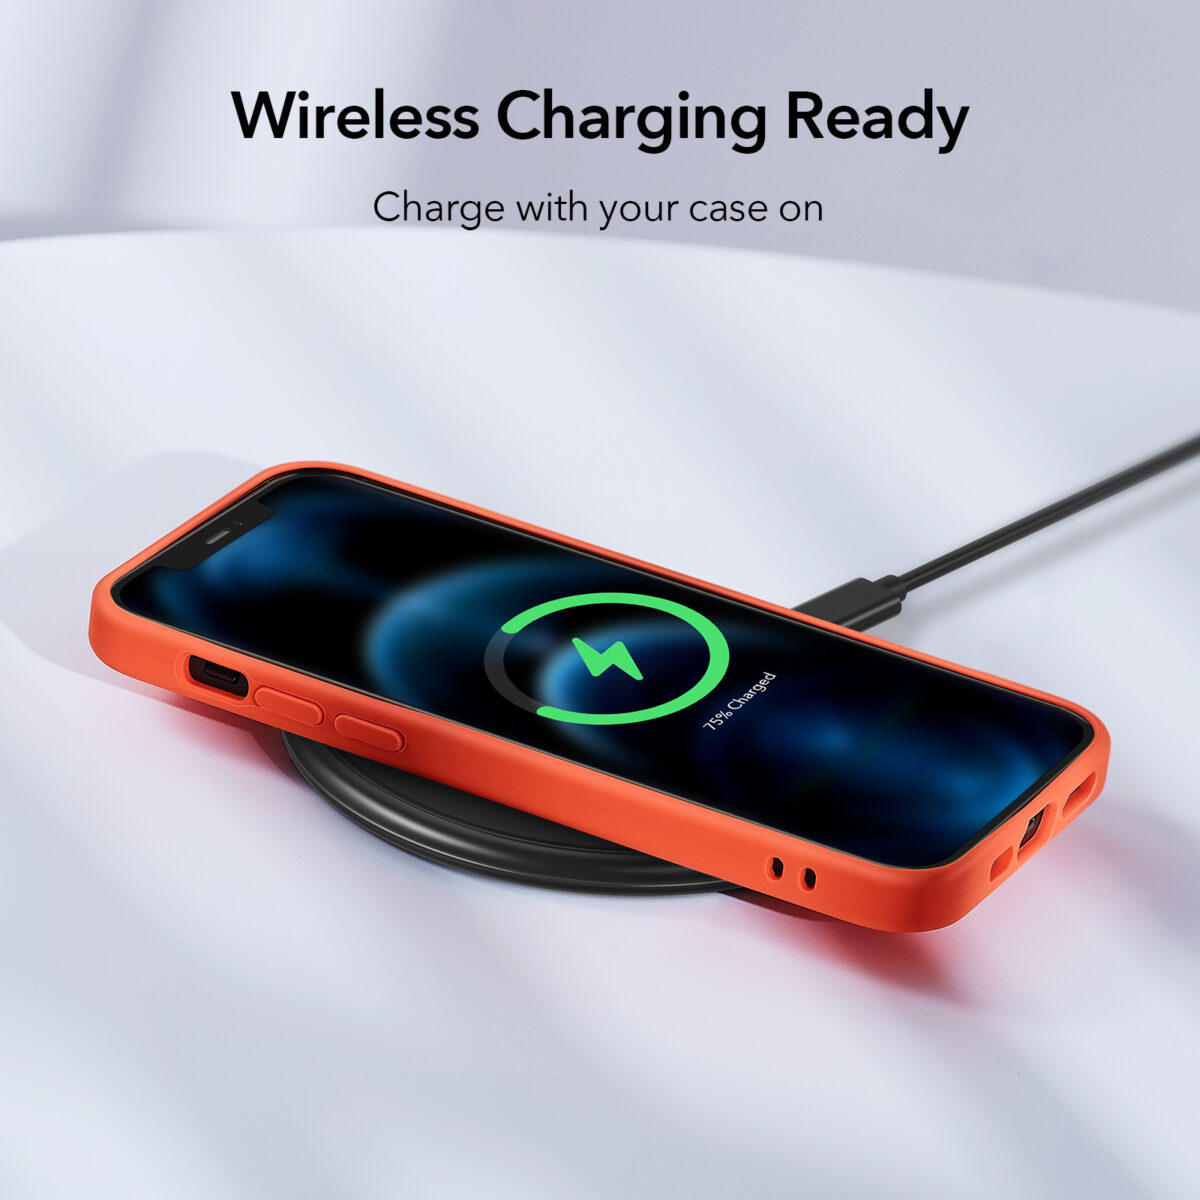 ESR Soft Silicone wireless charging ready Case coral orangek for iPhone 12 Pro